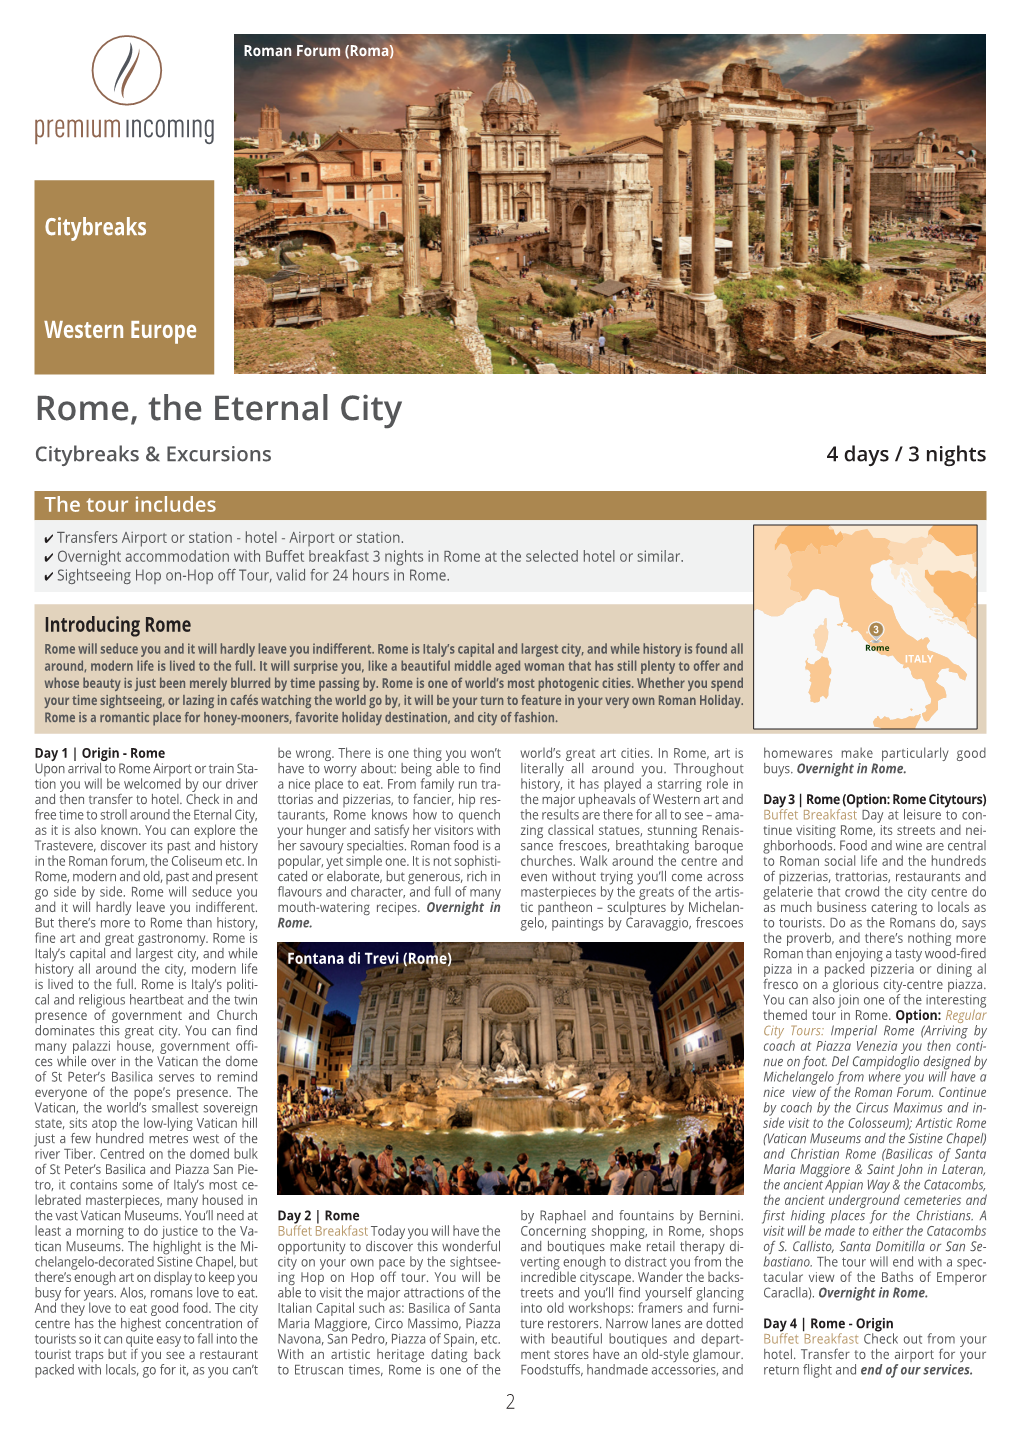 Rome, the Eternal City Citybreaks & Excursions 4 Days / 3 Nights